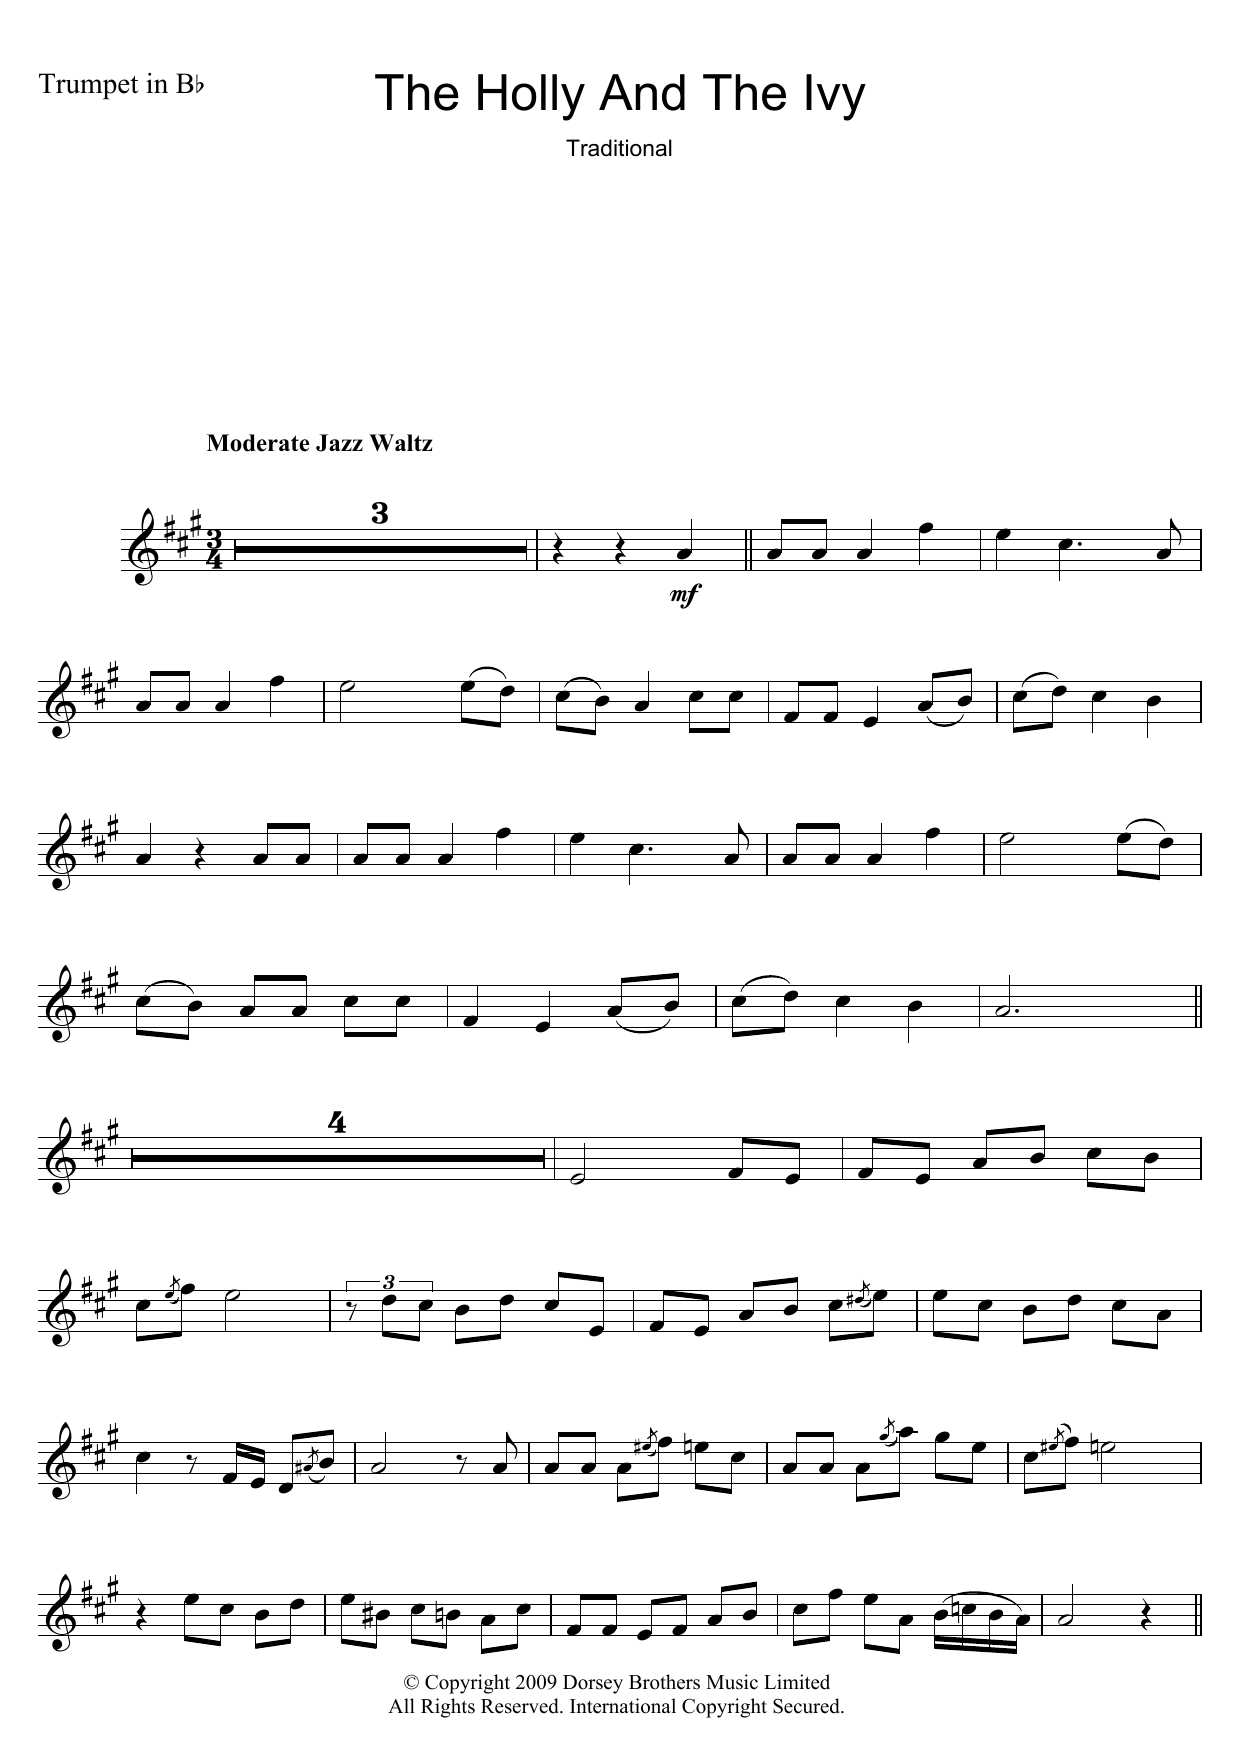 Christmas Carol The Holly And The Ivy sheet music notes and chords. Download Printable PDF.